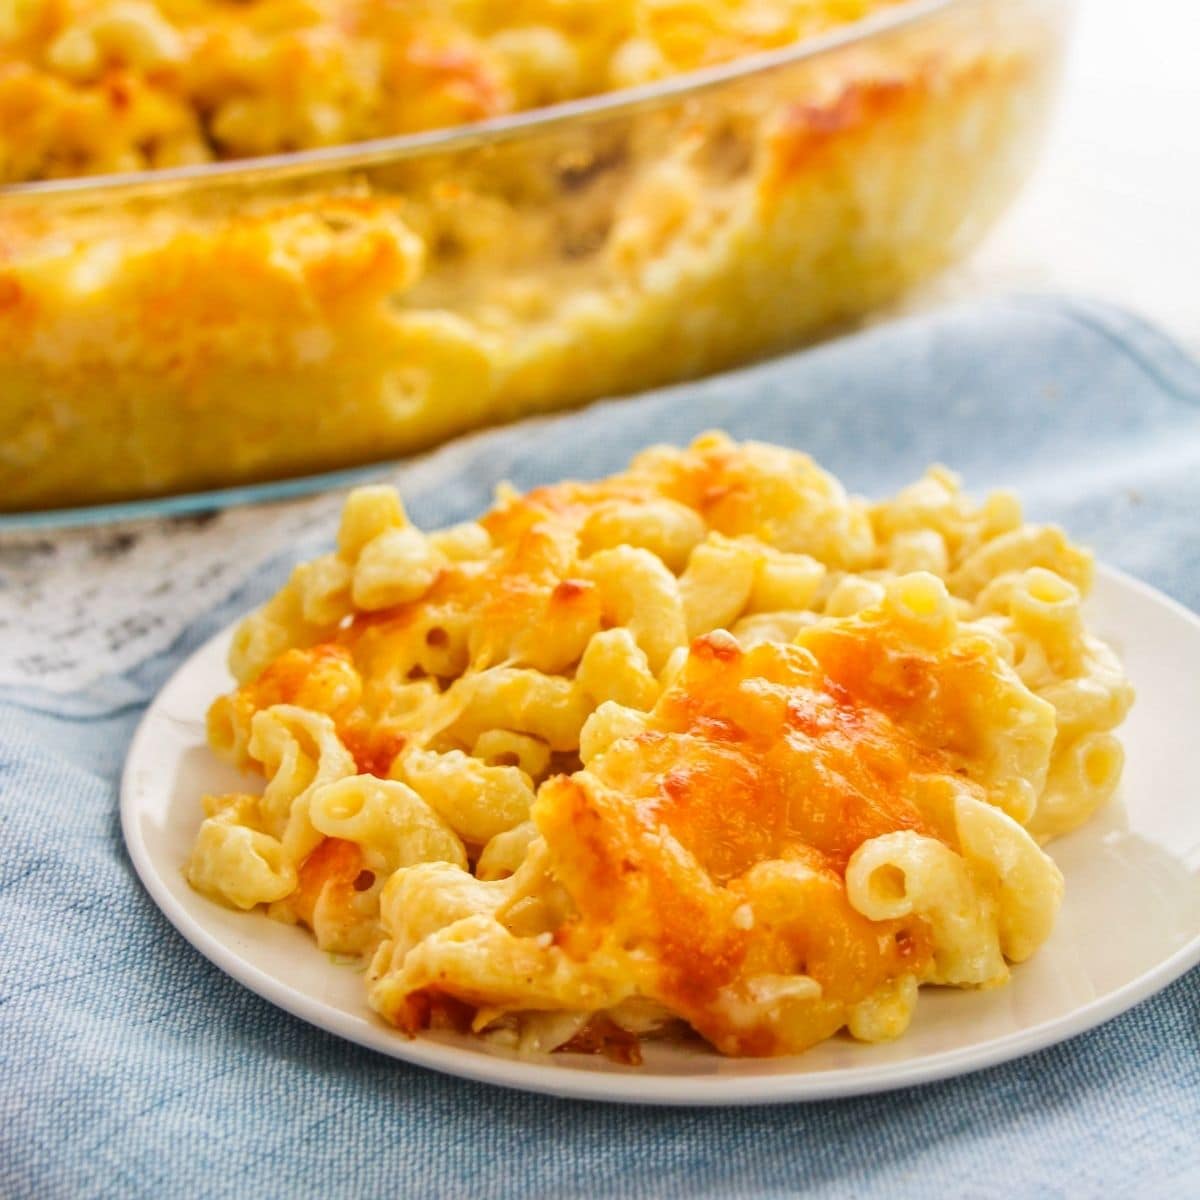 Recipe for homemade mac and cheese without flour sasfleet